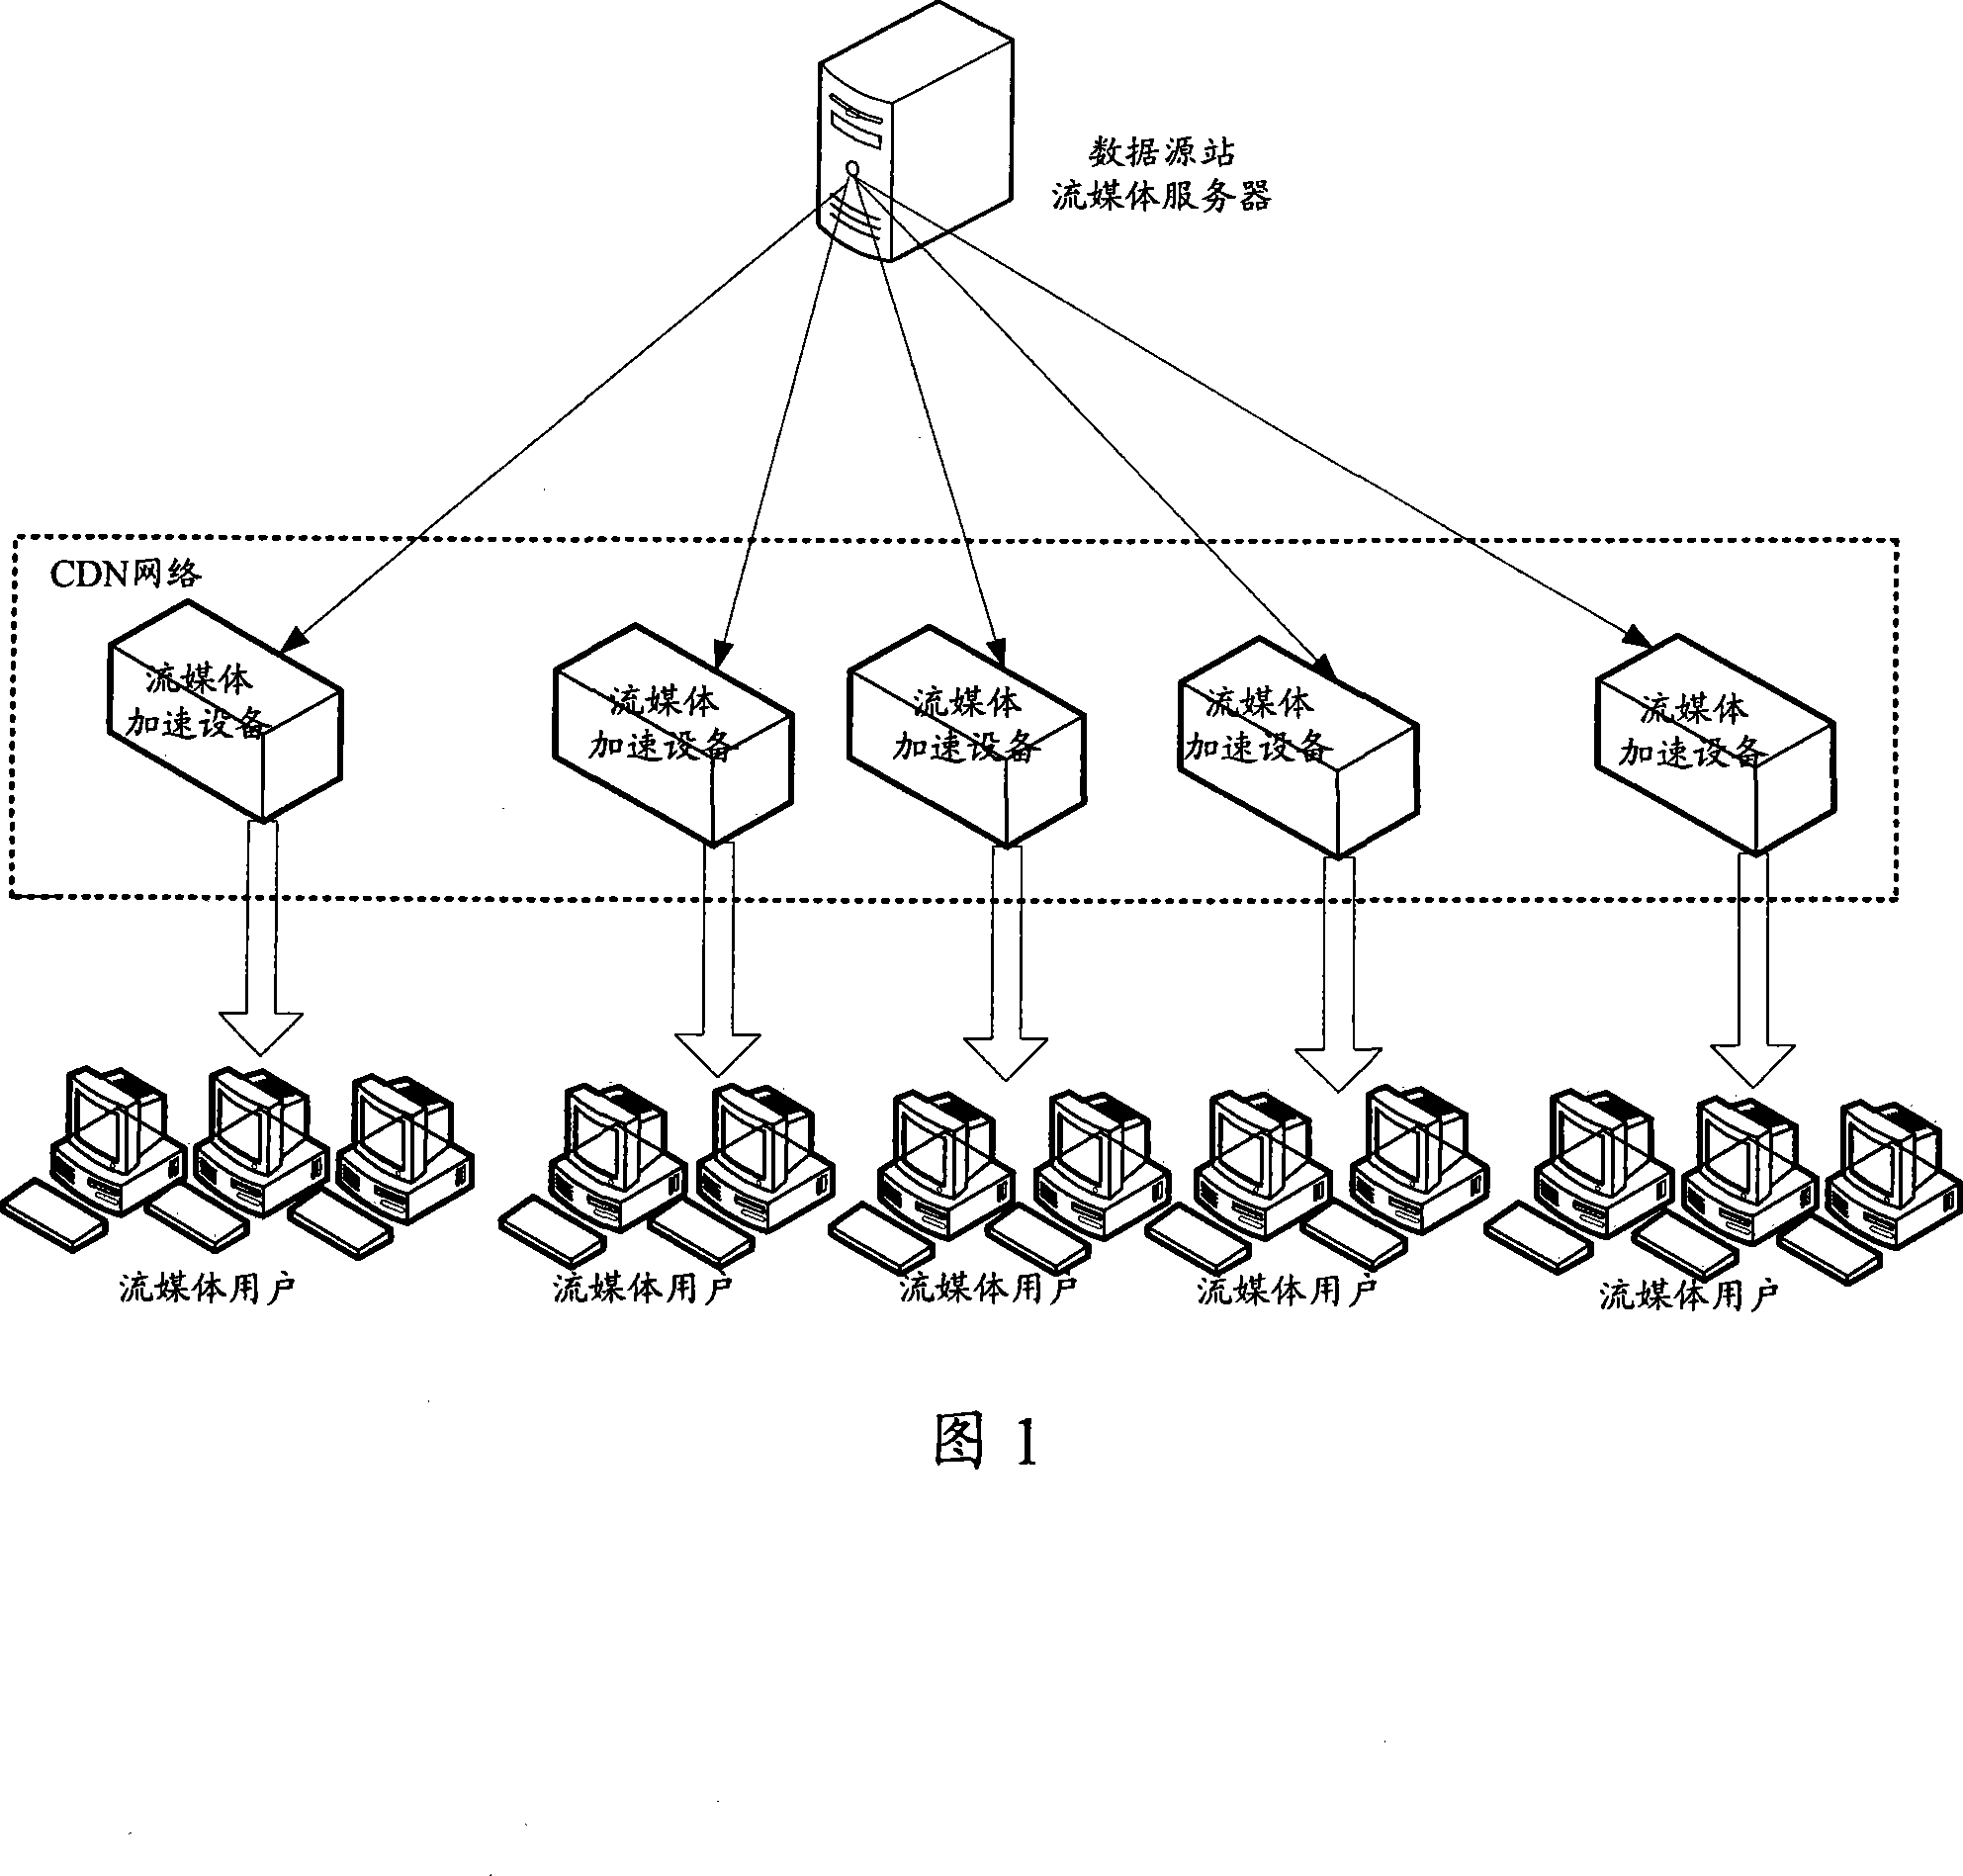 Stream media acceleration system, method and device based on content distribution network